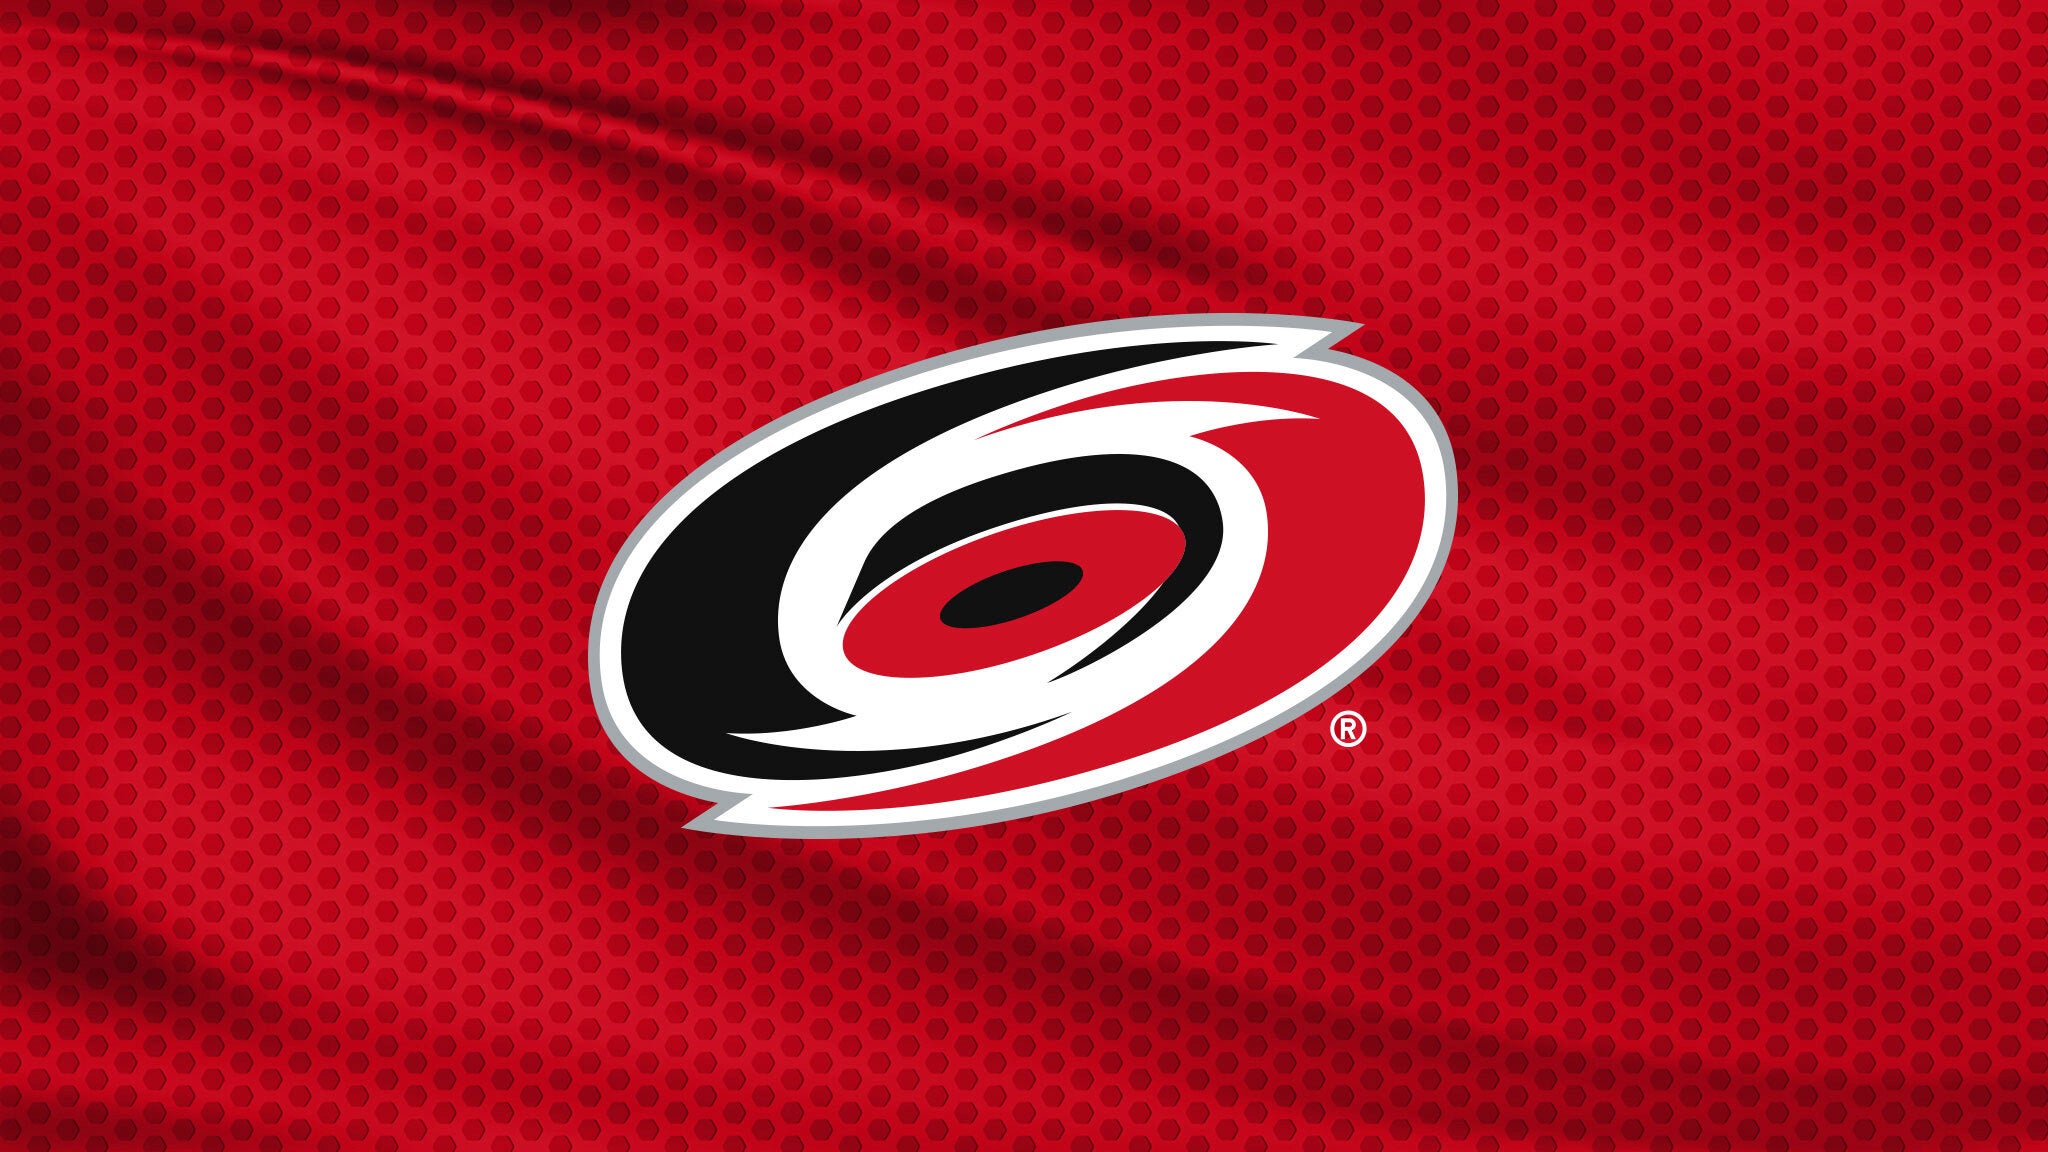 Carolina Hurricanes vs. Detroit Red Wings in Raleigh promo photo for Standing Room Only Ticket presale offer code